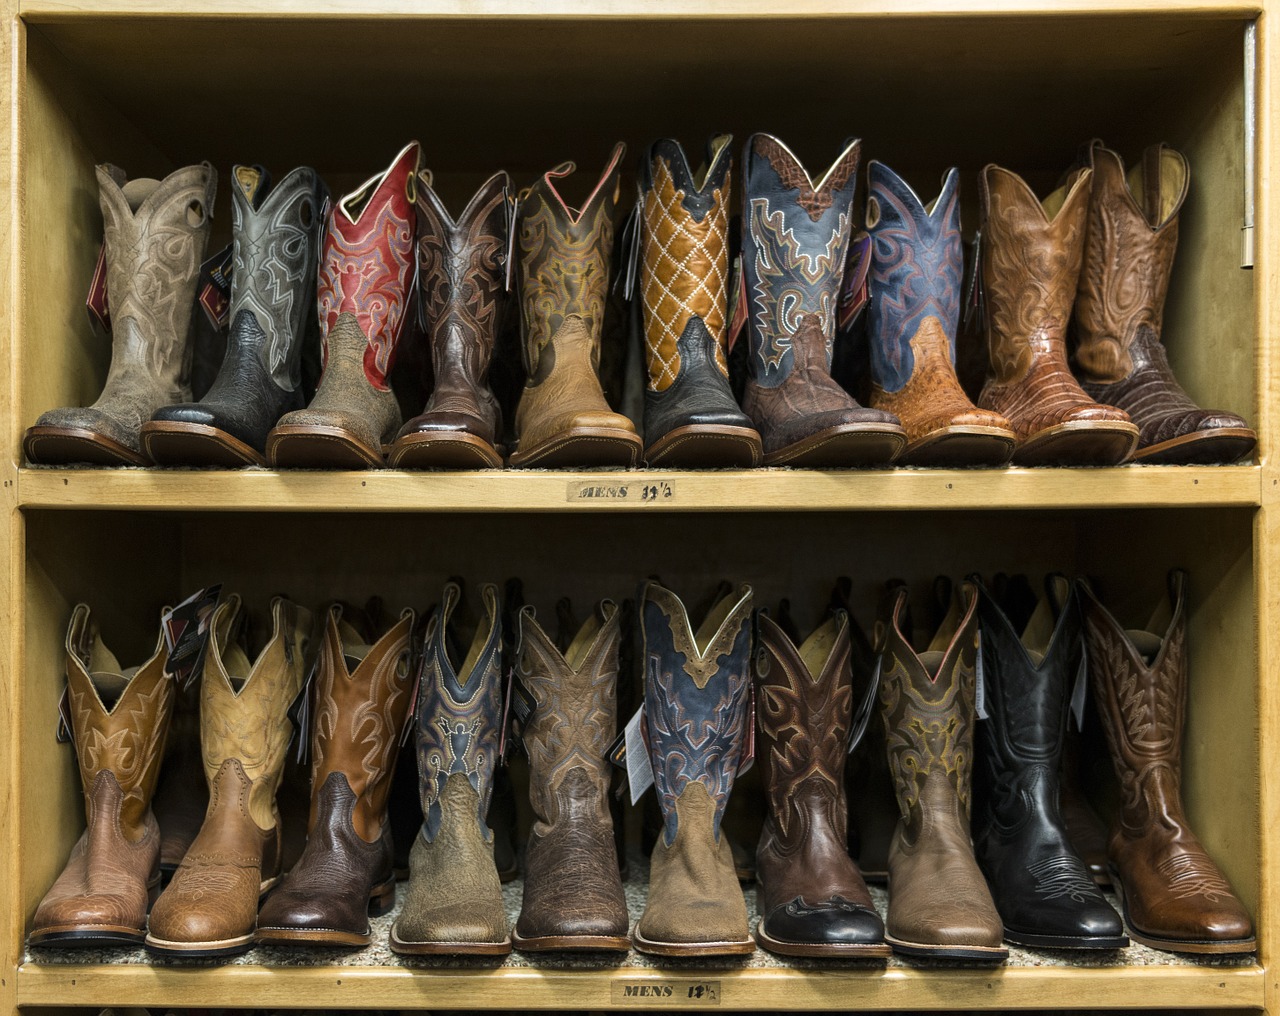 3 Differences Between Caiman Leather and Alligator Leather – Country View  Western Store